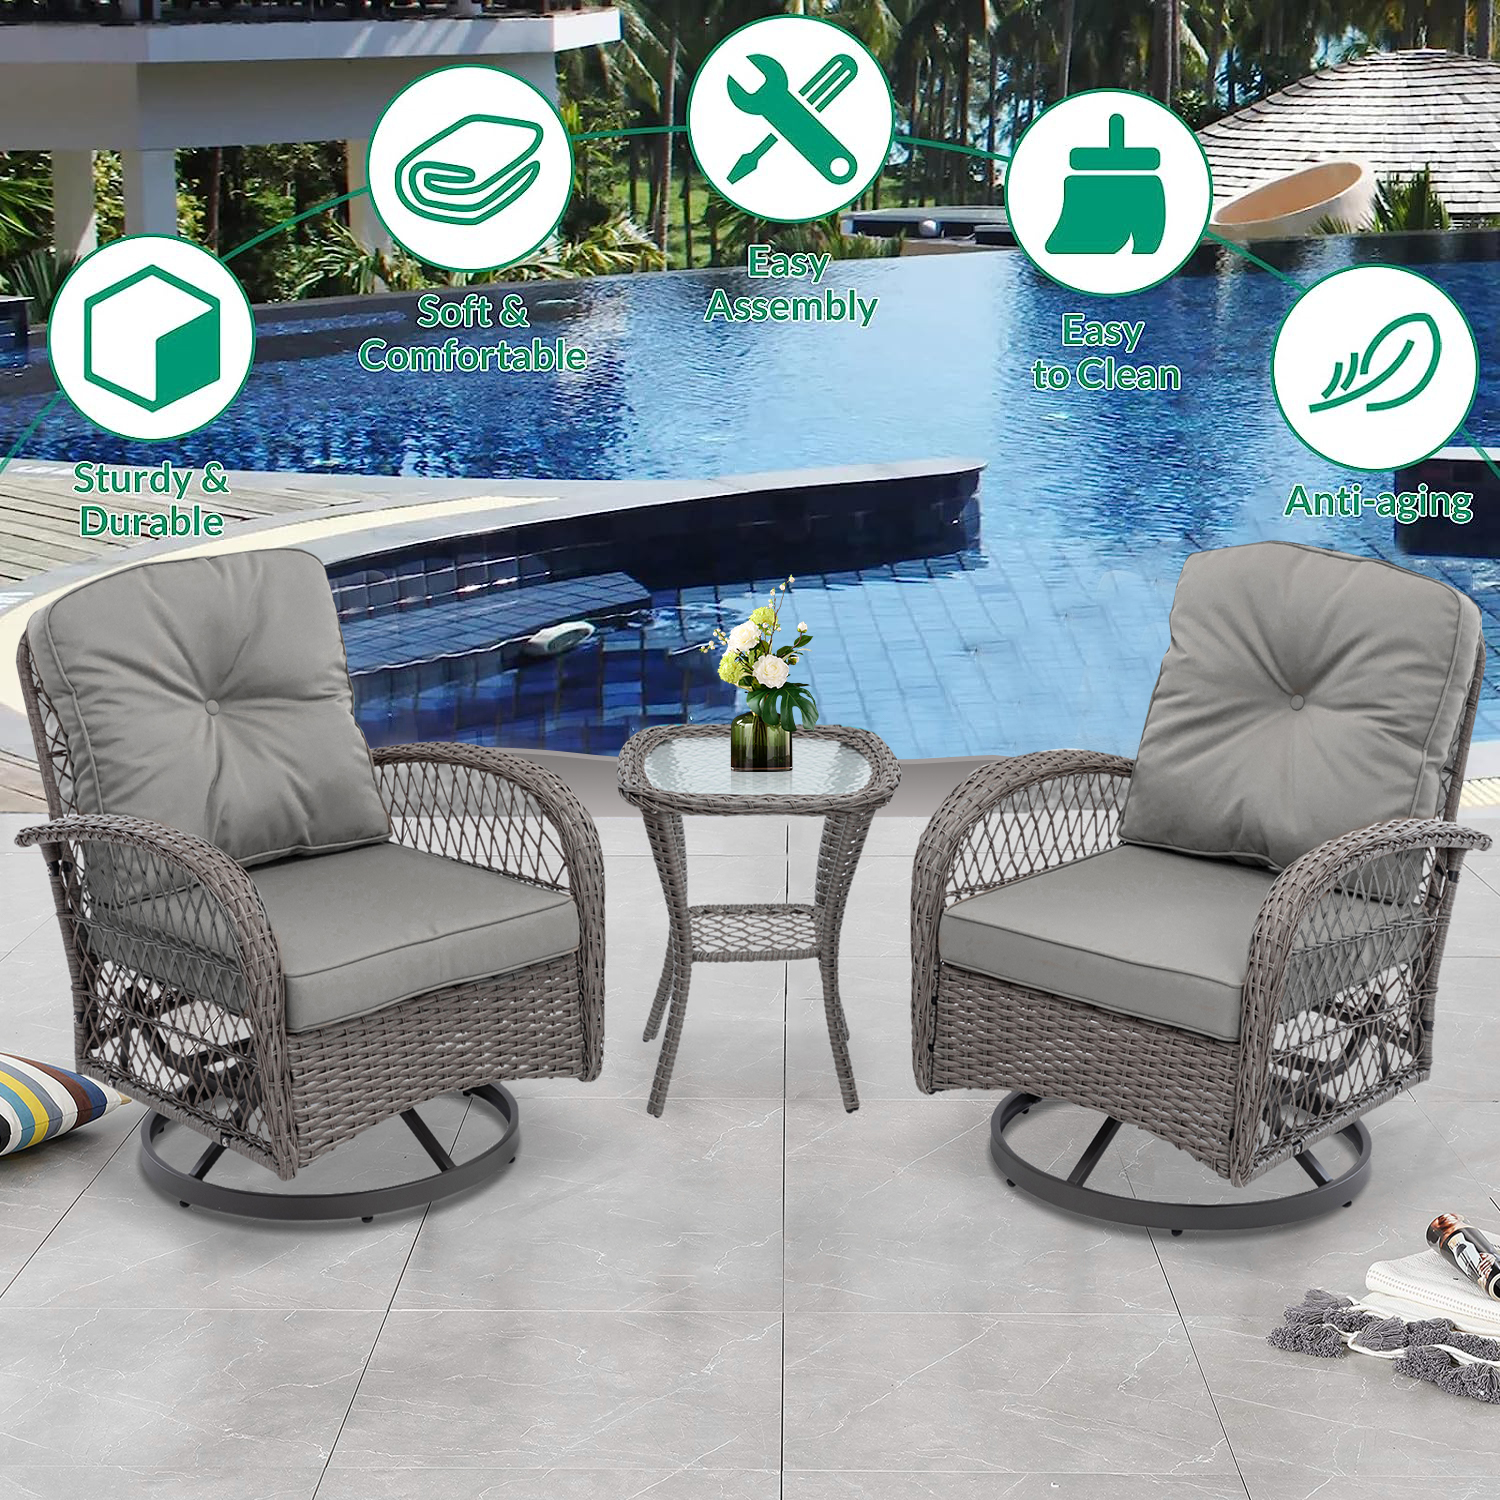 Segmart Swivel Rocking Chairs Patio Conversation Furniture Set, 3-Piece Outdoor 360° Rocking Patio Conversation Set with Thickened Cushions and Glass Coffee Table for Backyard, 275 LBS, Grey - image 4 of 10